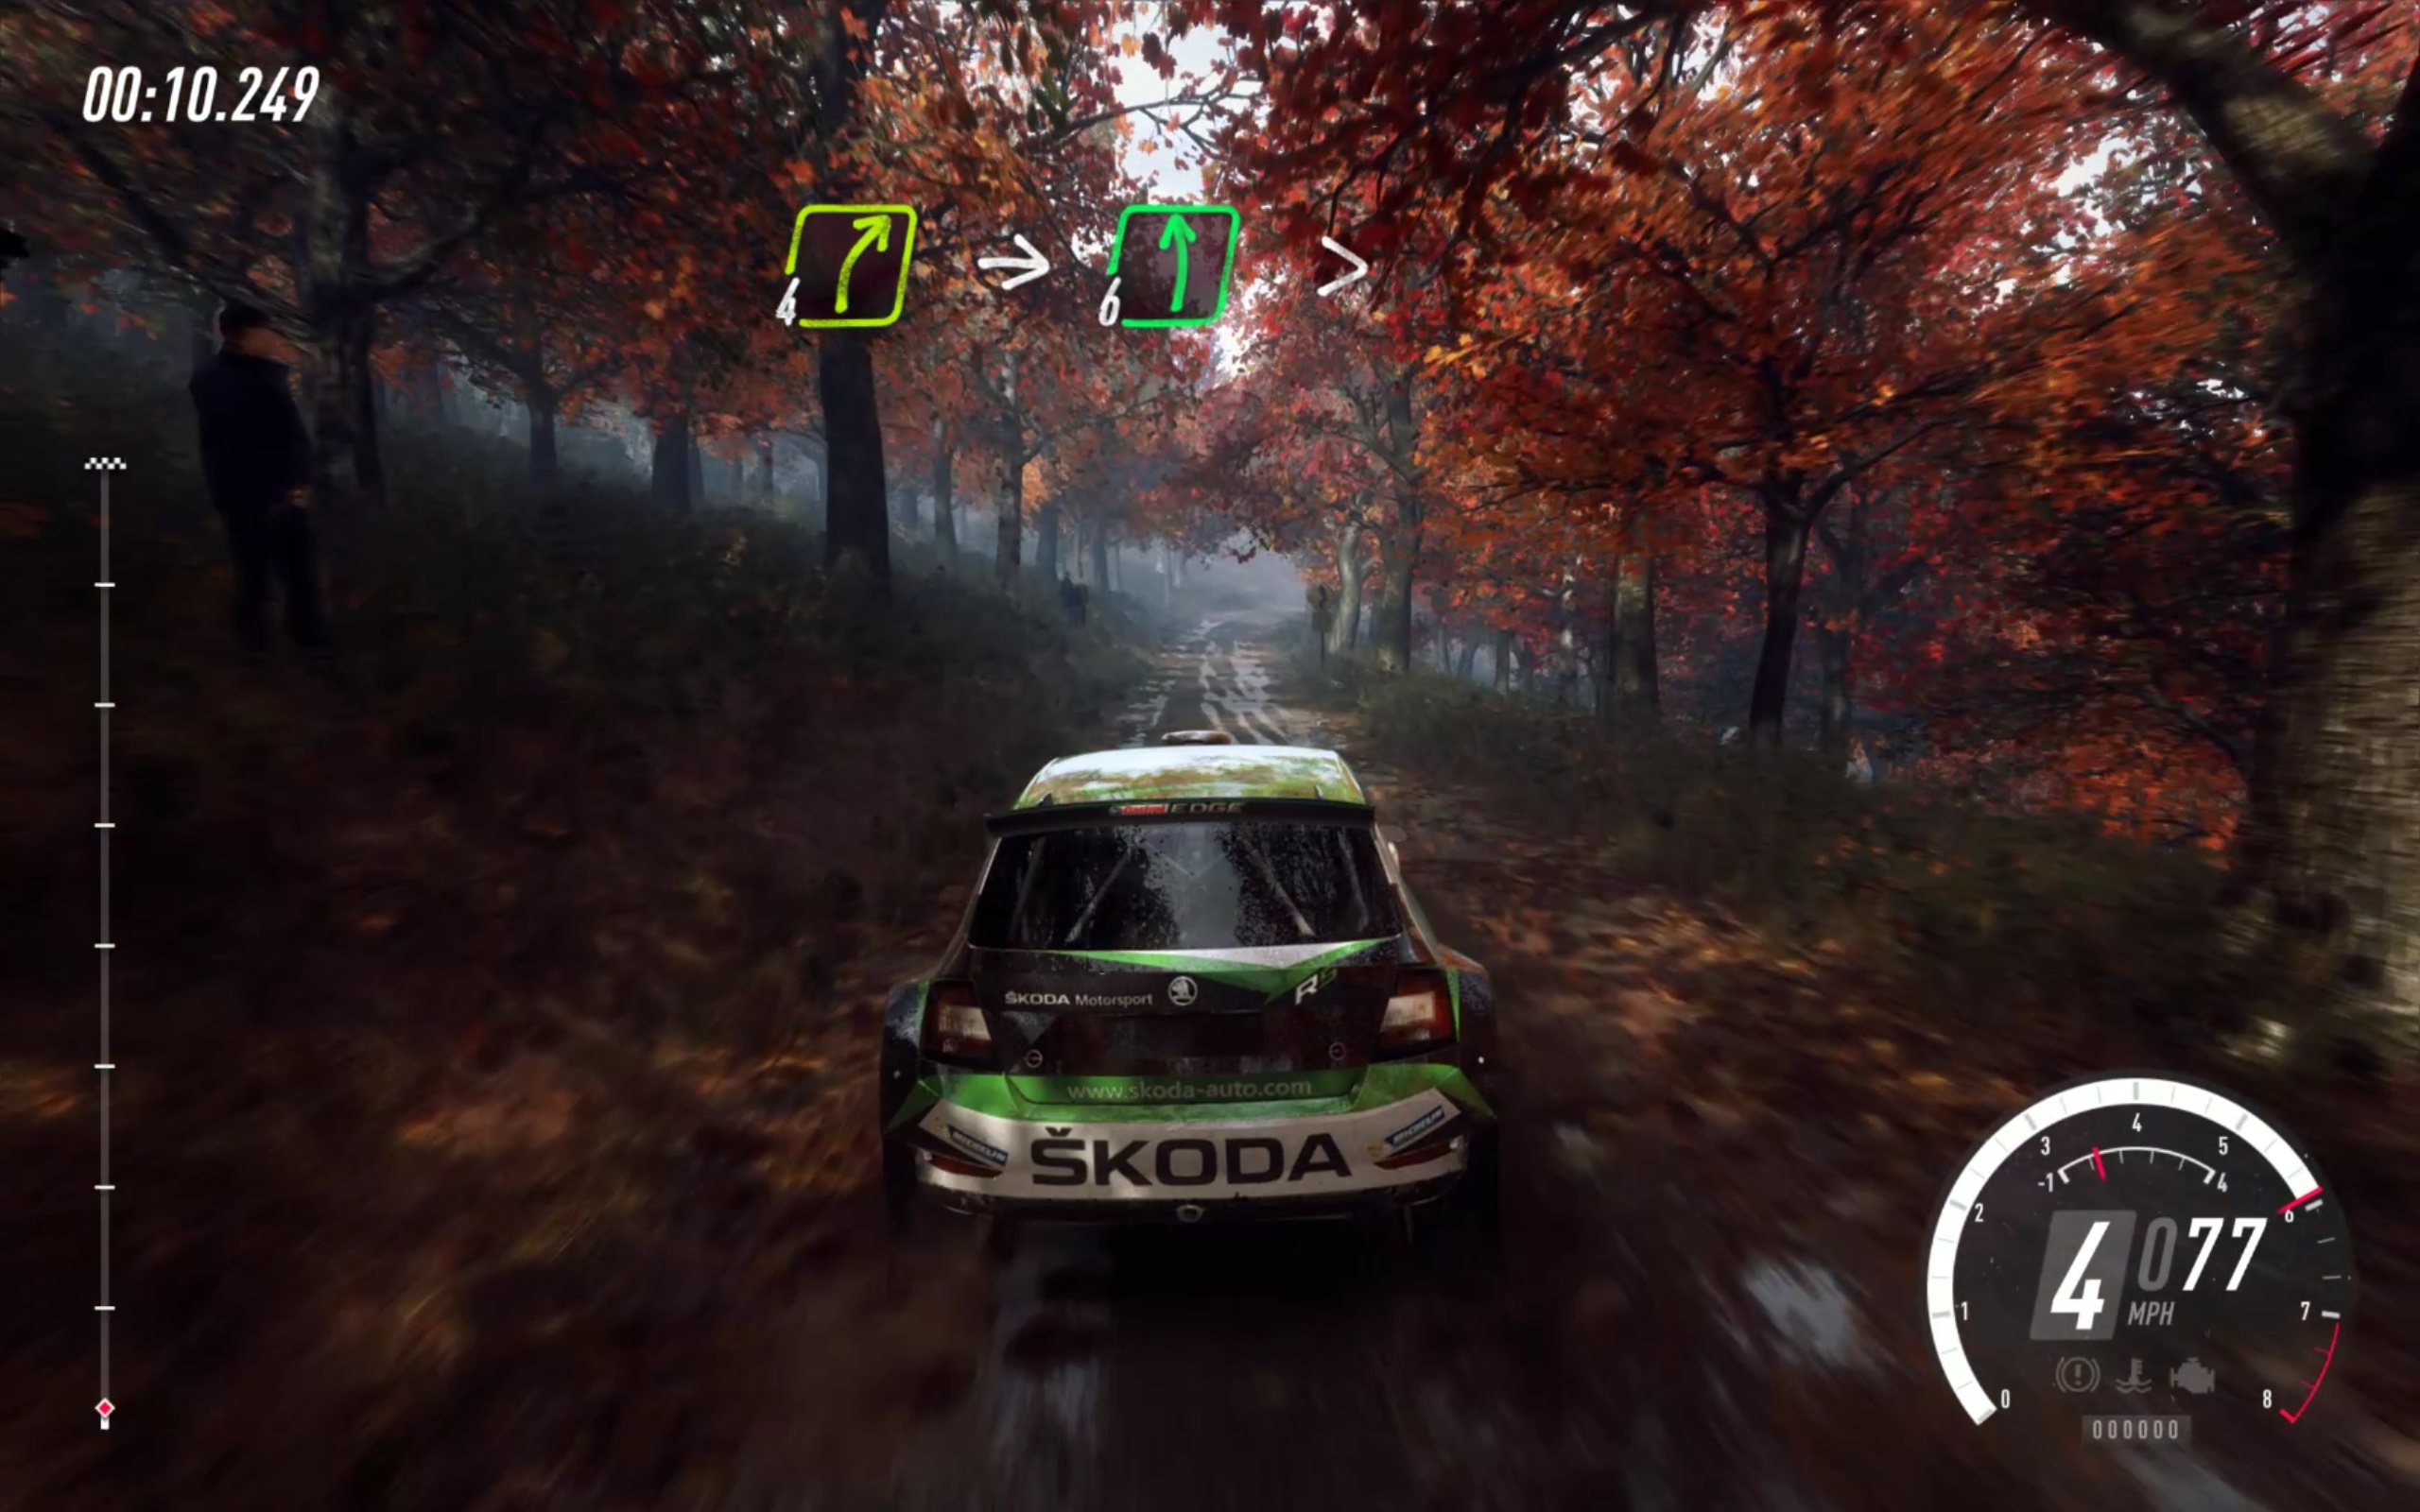 Best racing games - a rally car races in an autumn forest